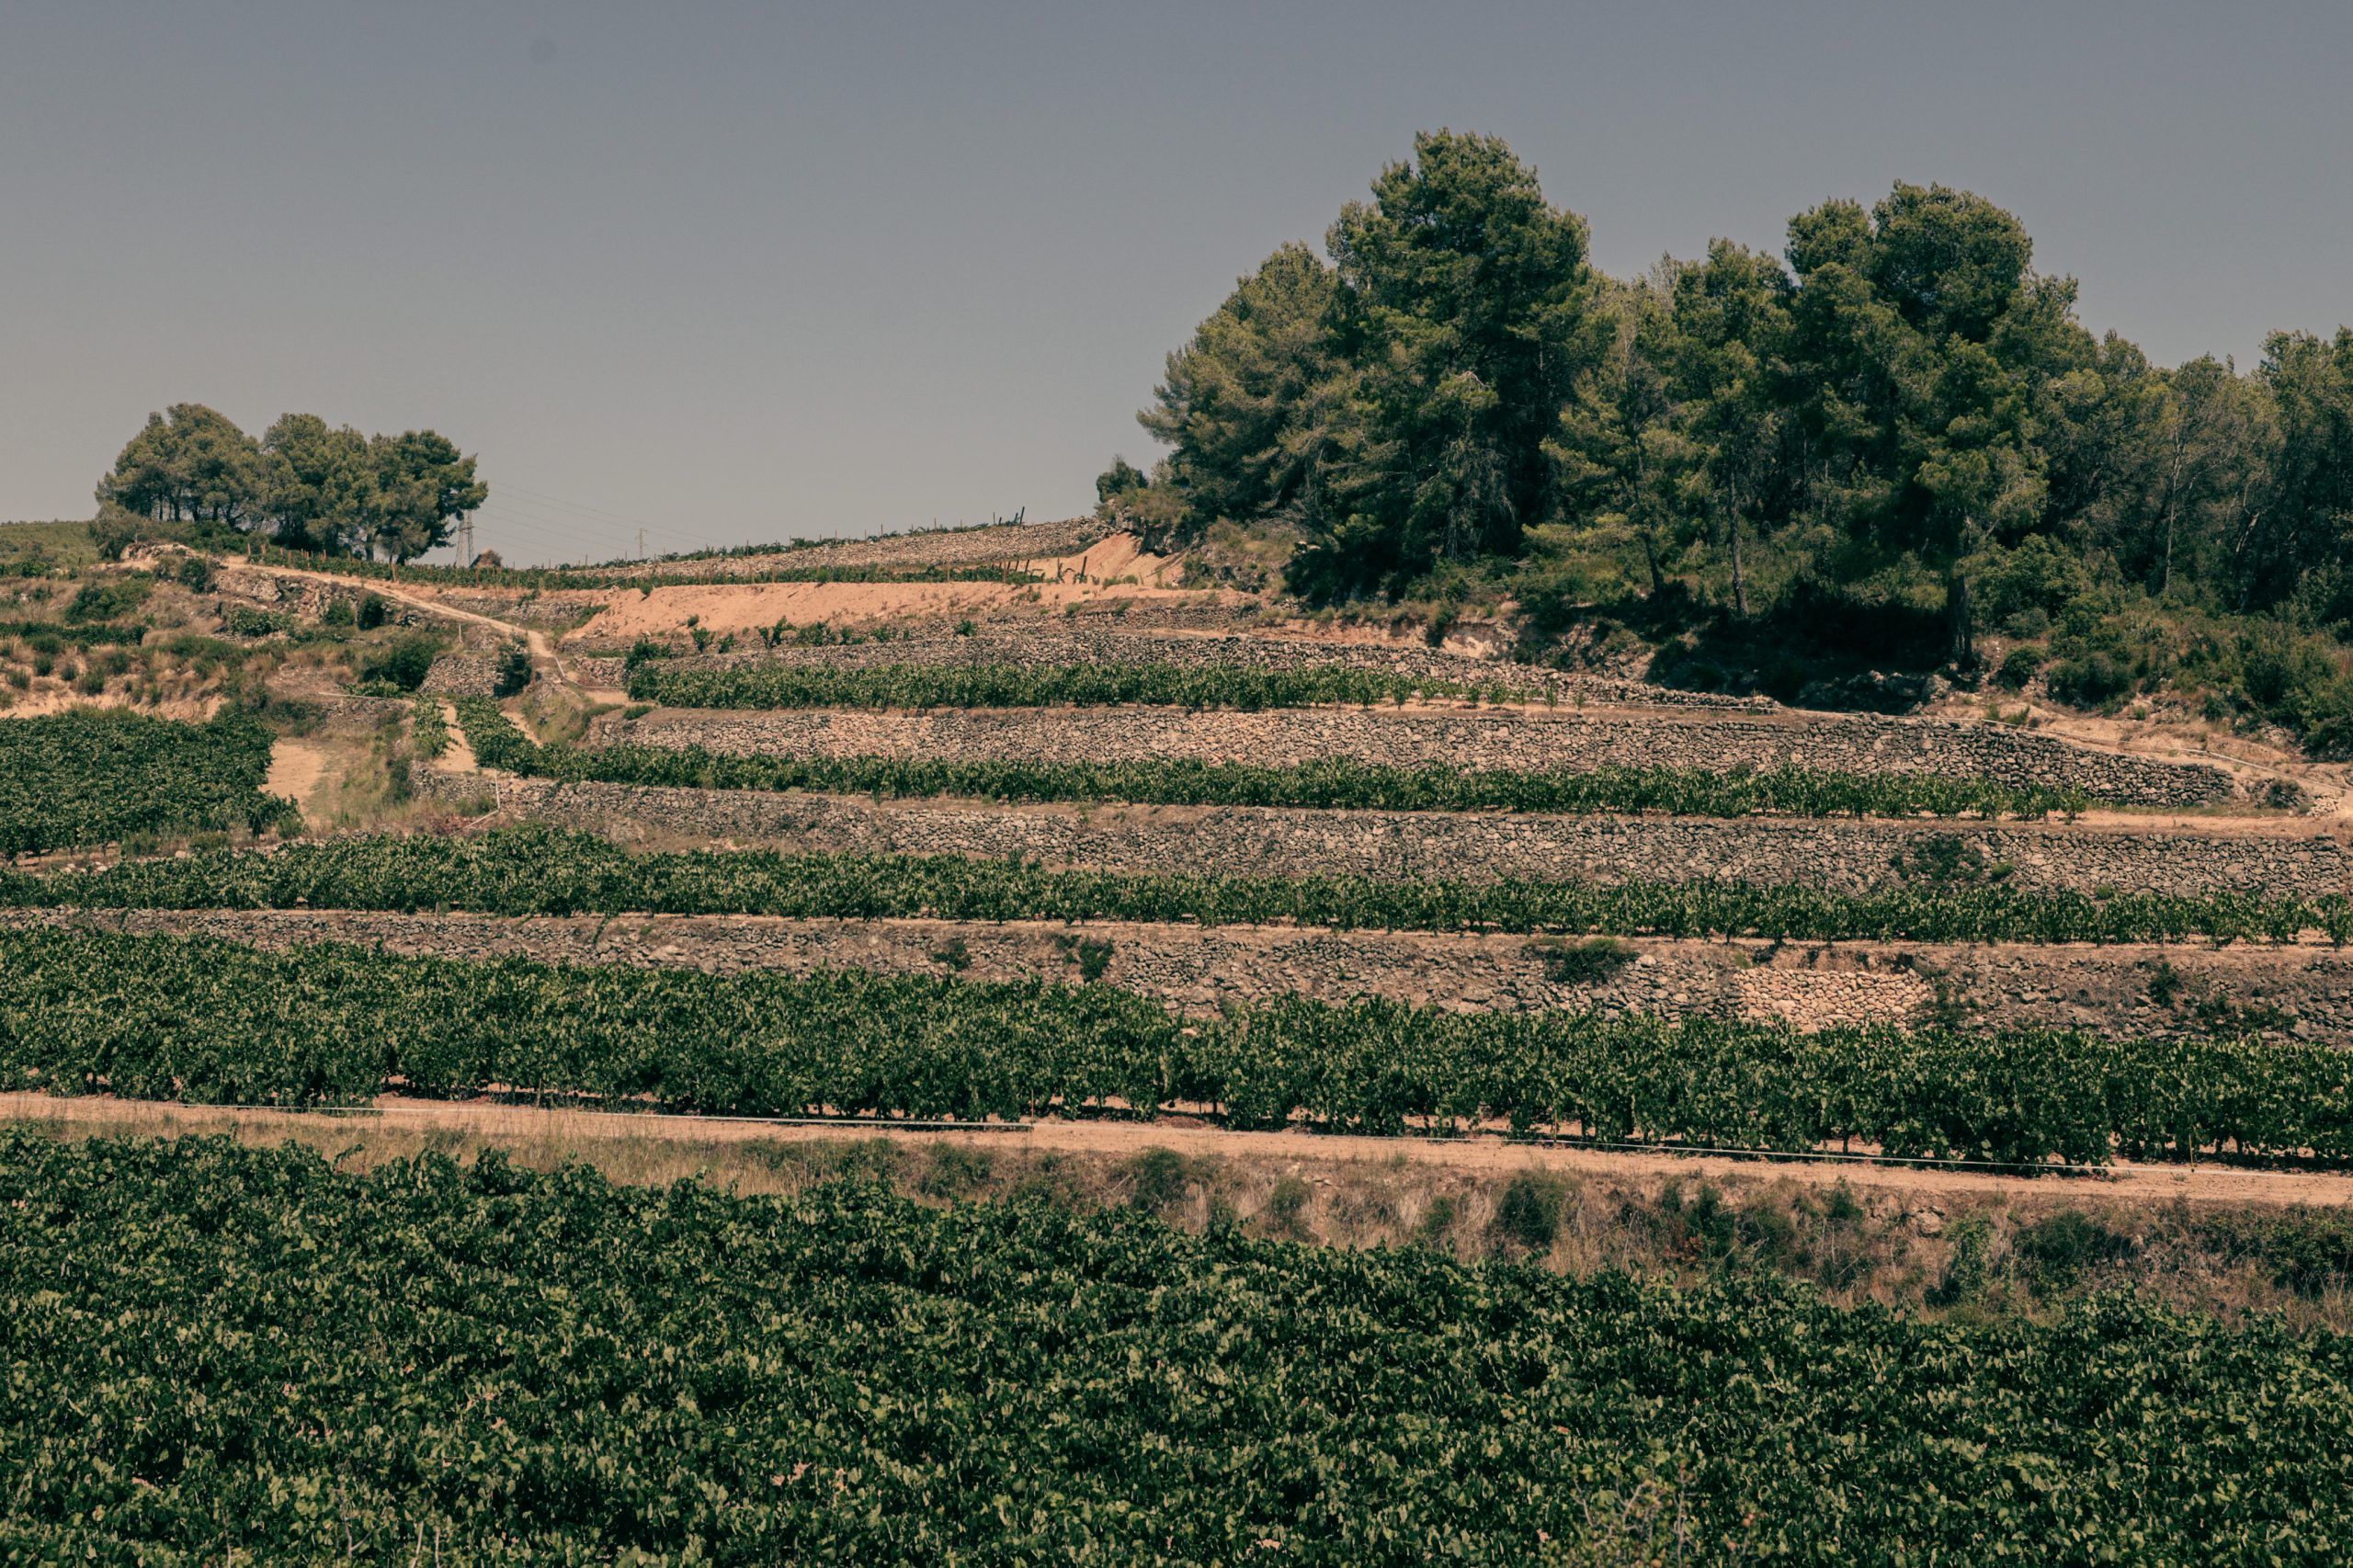 Why sommeliers need to take heed of the still wines of Penedès